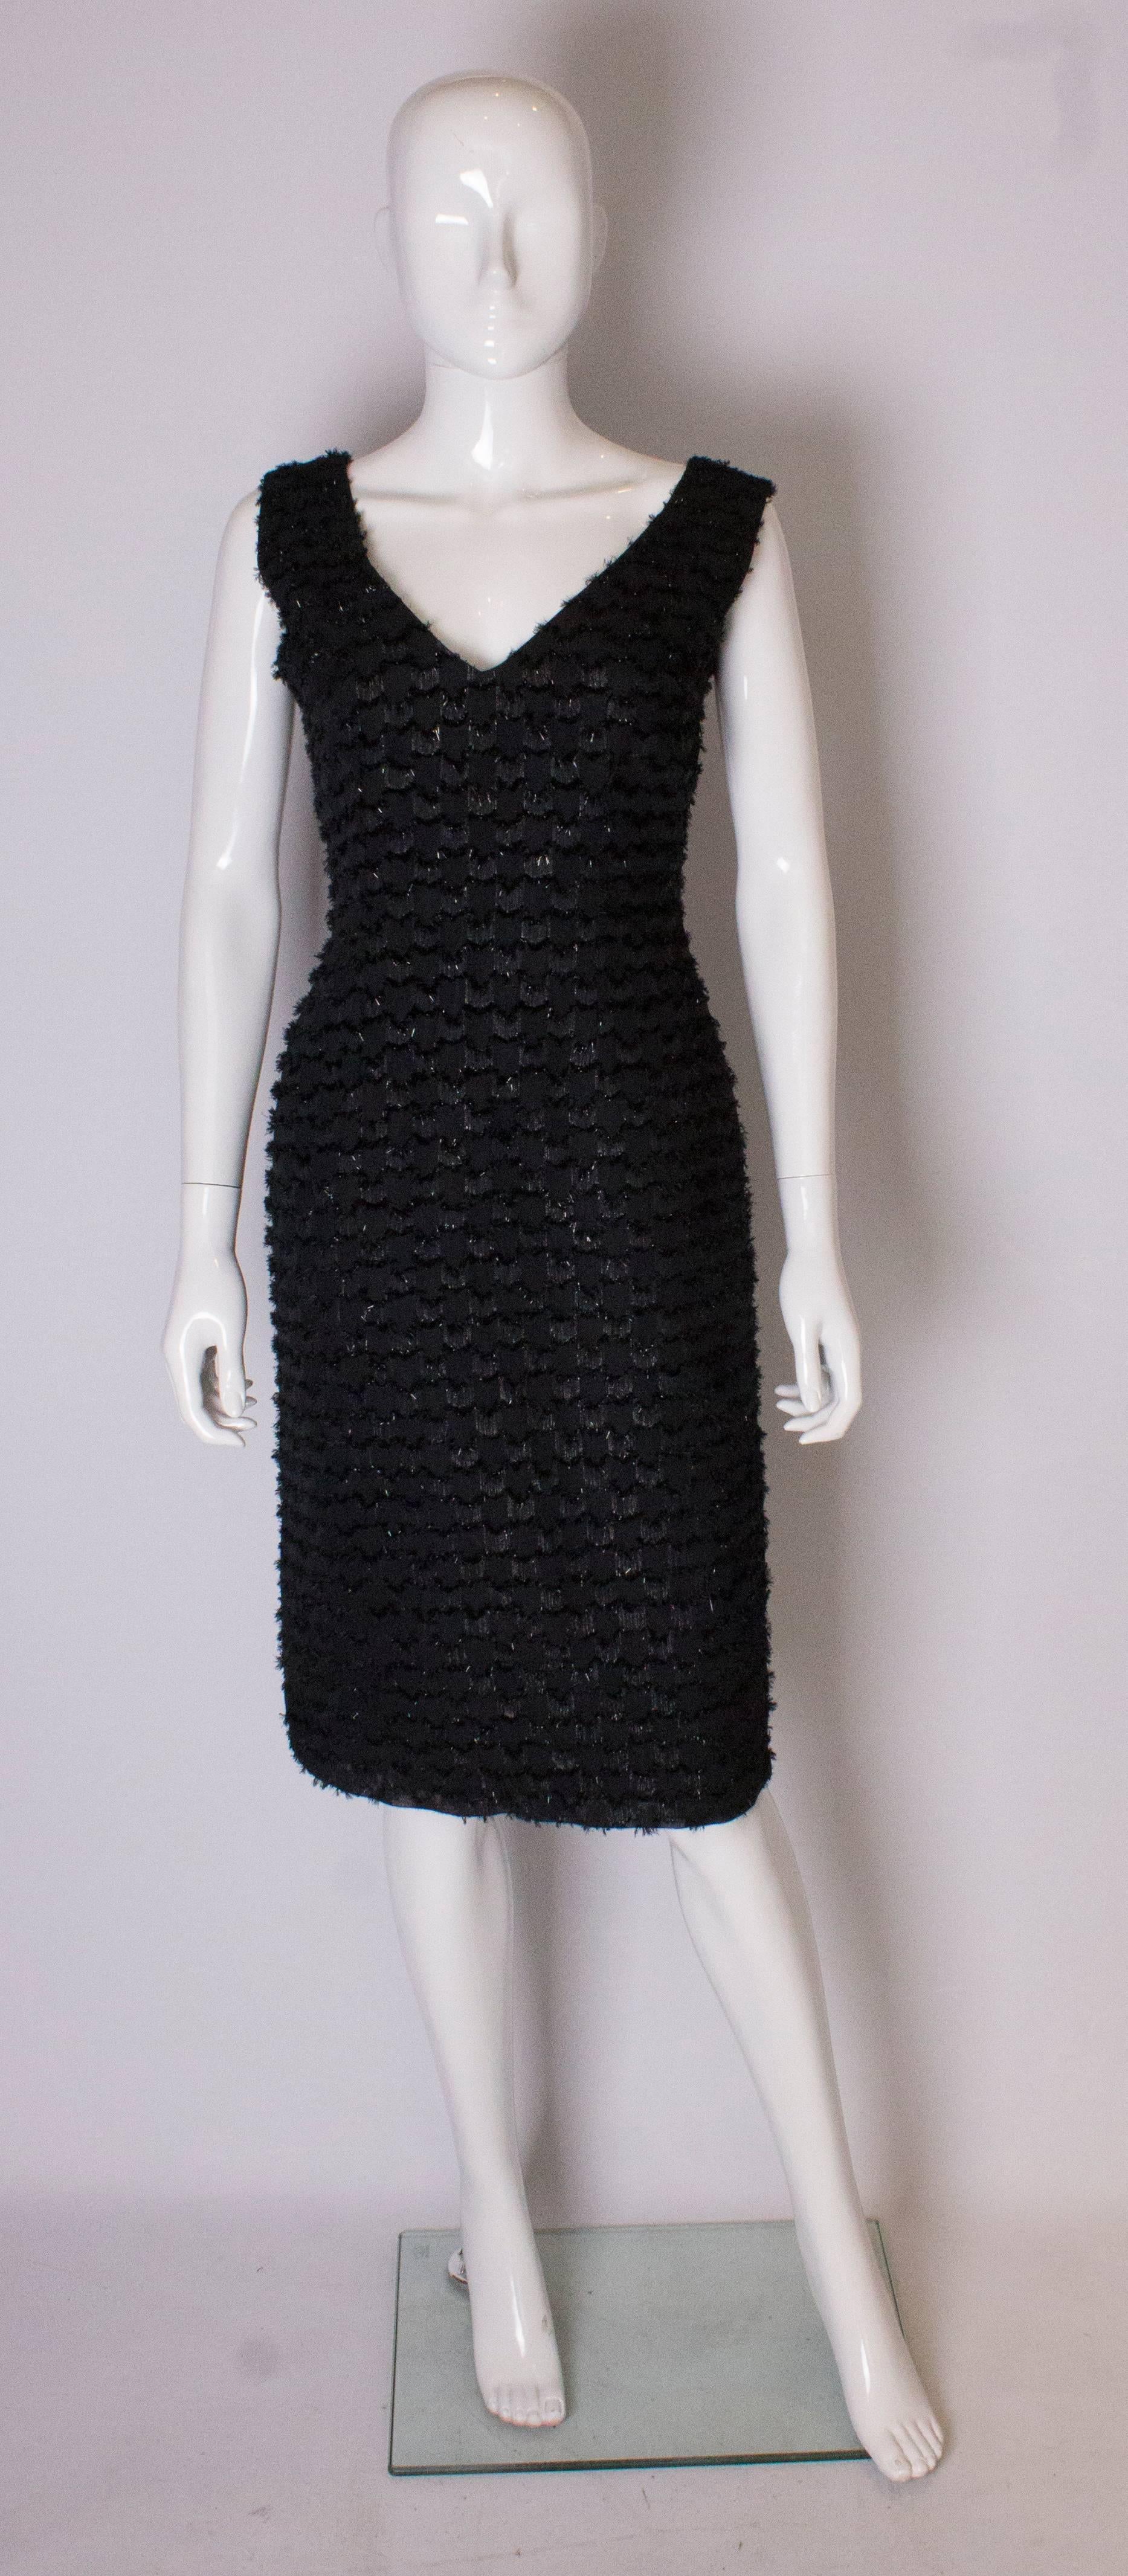 A chic little vintage black dress by Tussi of Australia. The dress has a v neckline and backline ,  and has tufting detail over the body. It is fully lined and has a central back zip.